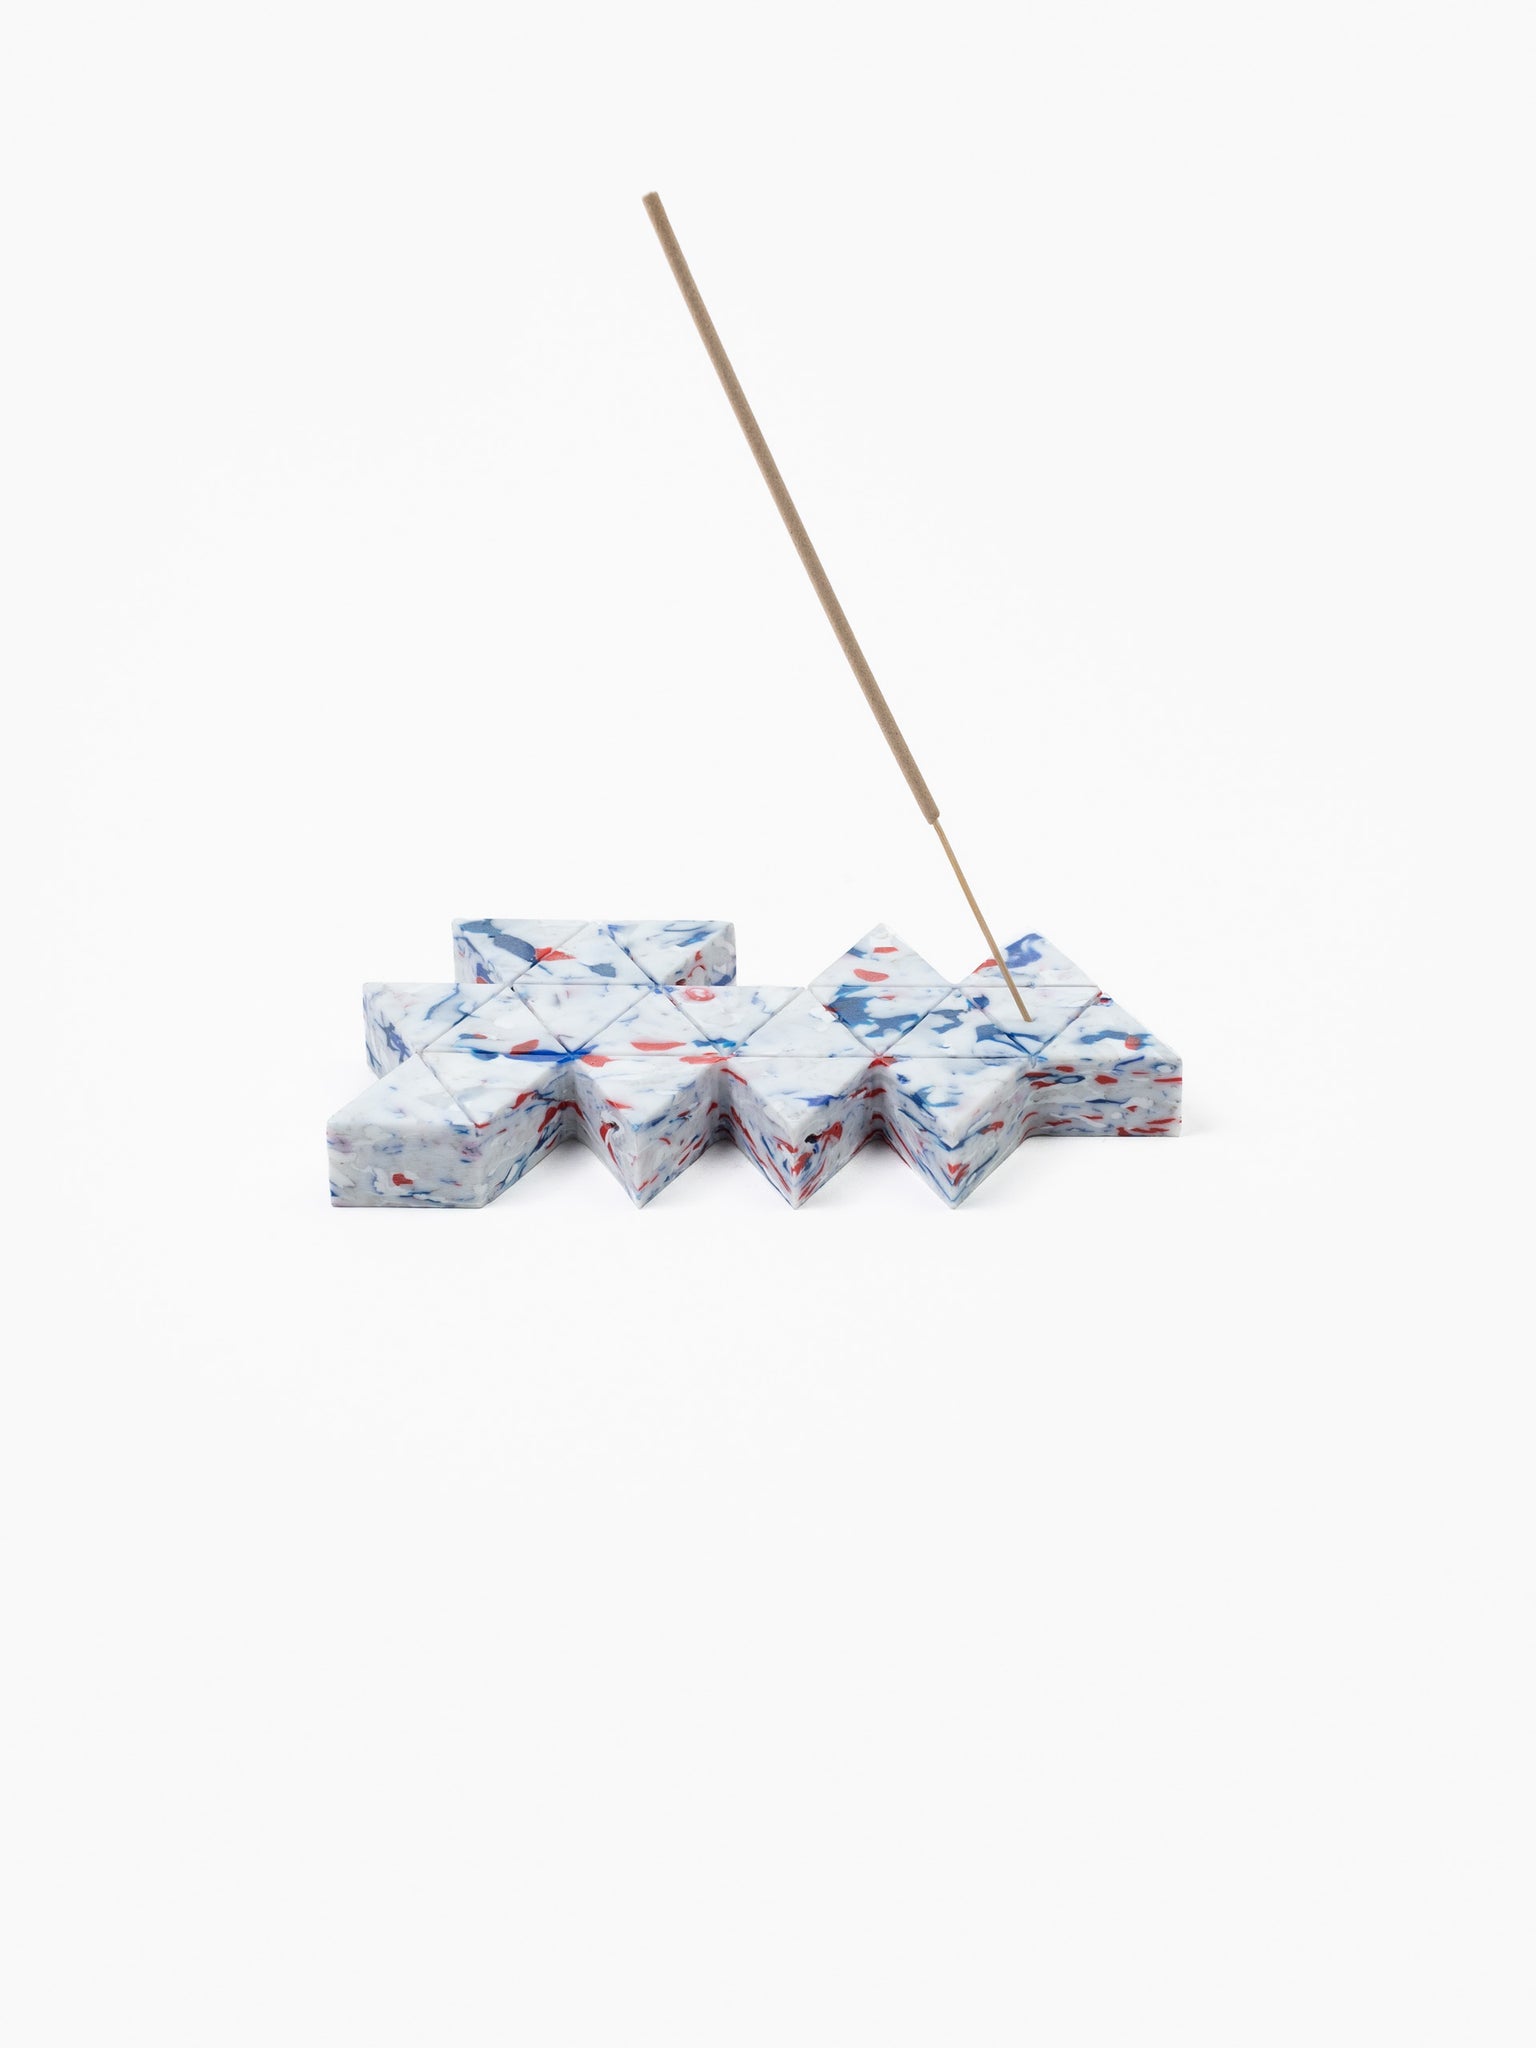 Dymaxion Map Incense Holder White